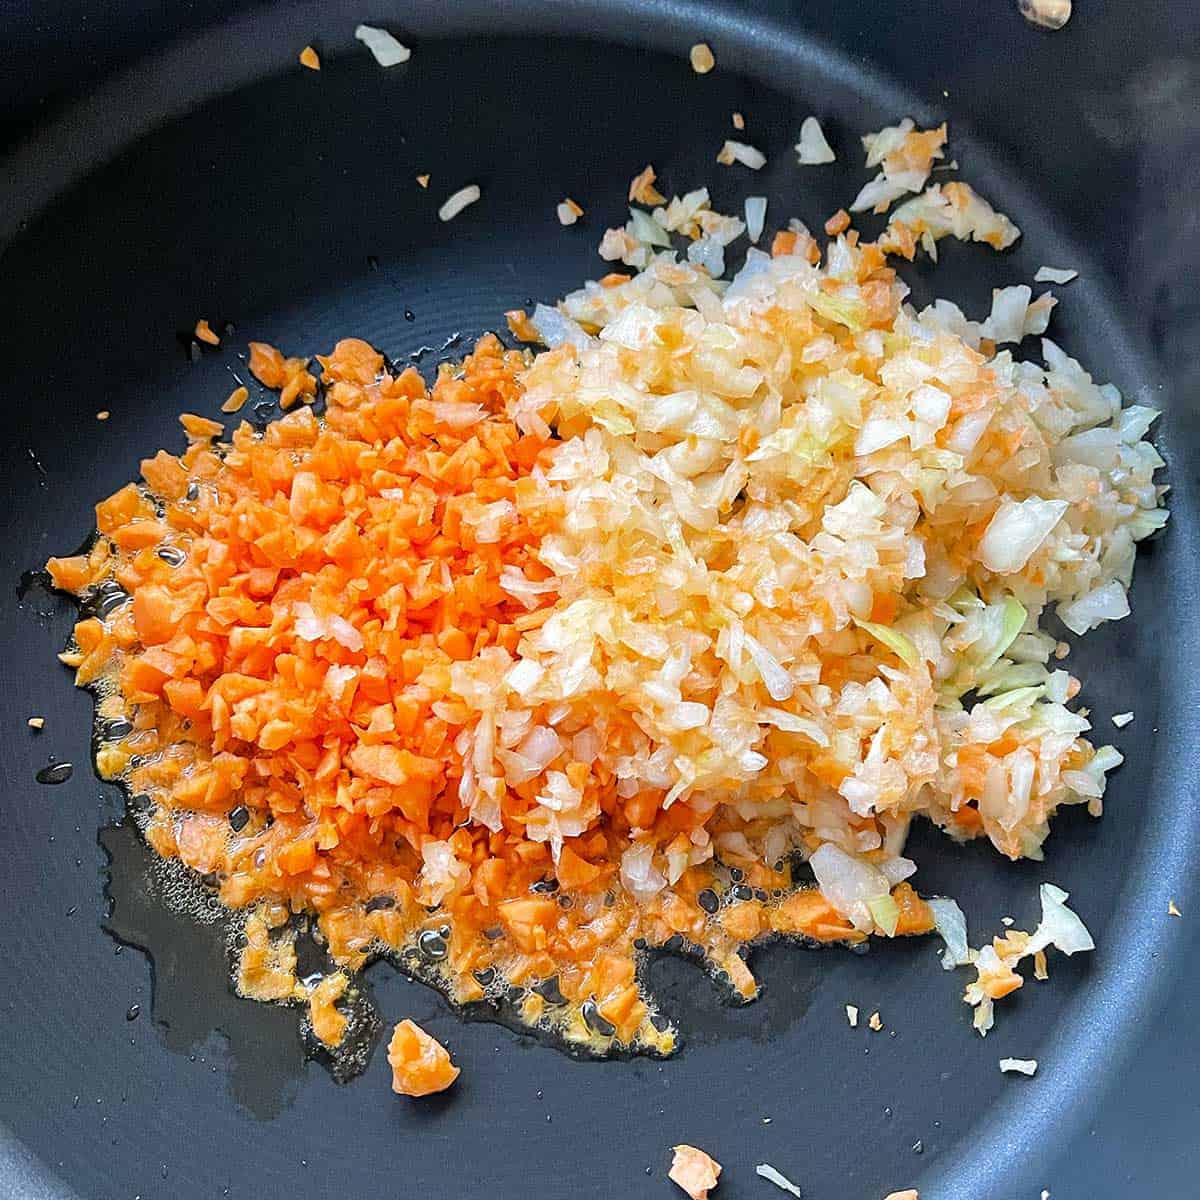 Diced carrot and onion cooking in a frying pa.